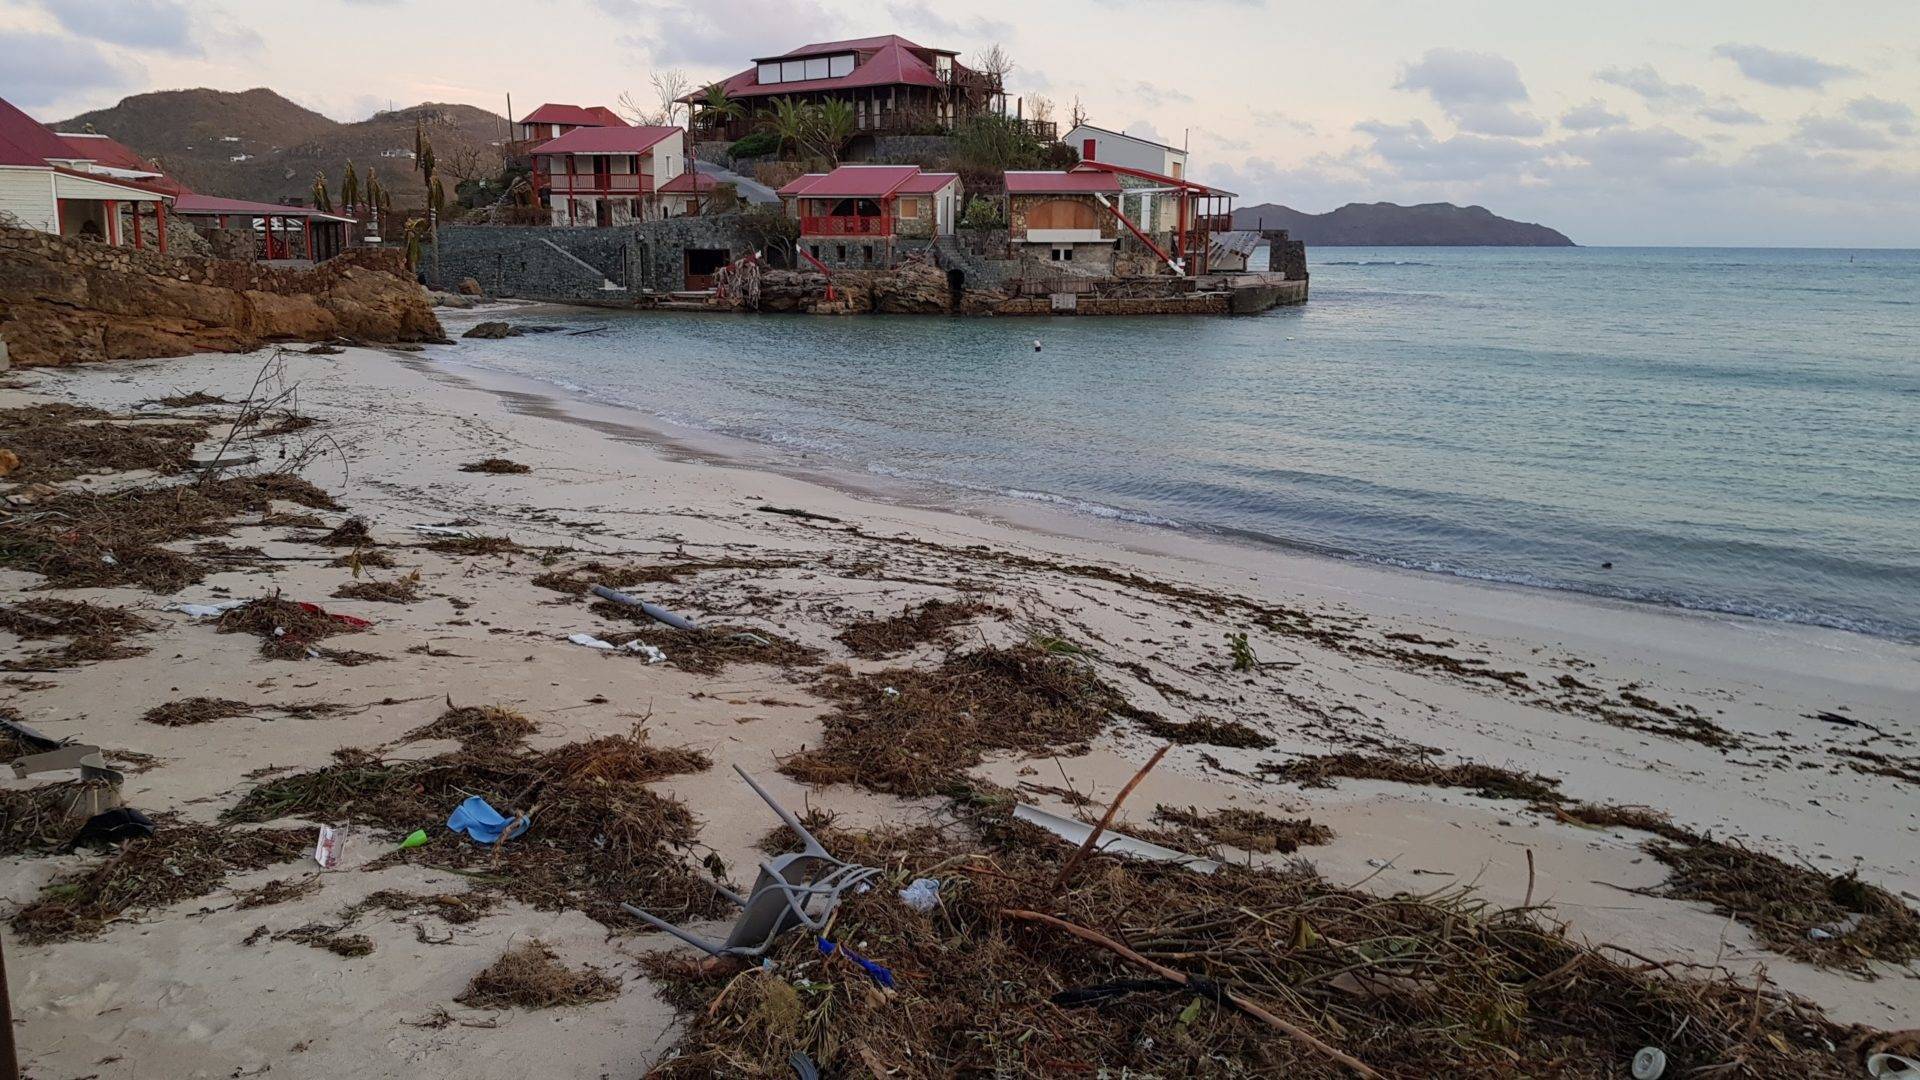 St Barts after Irma